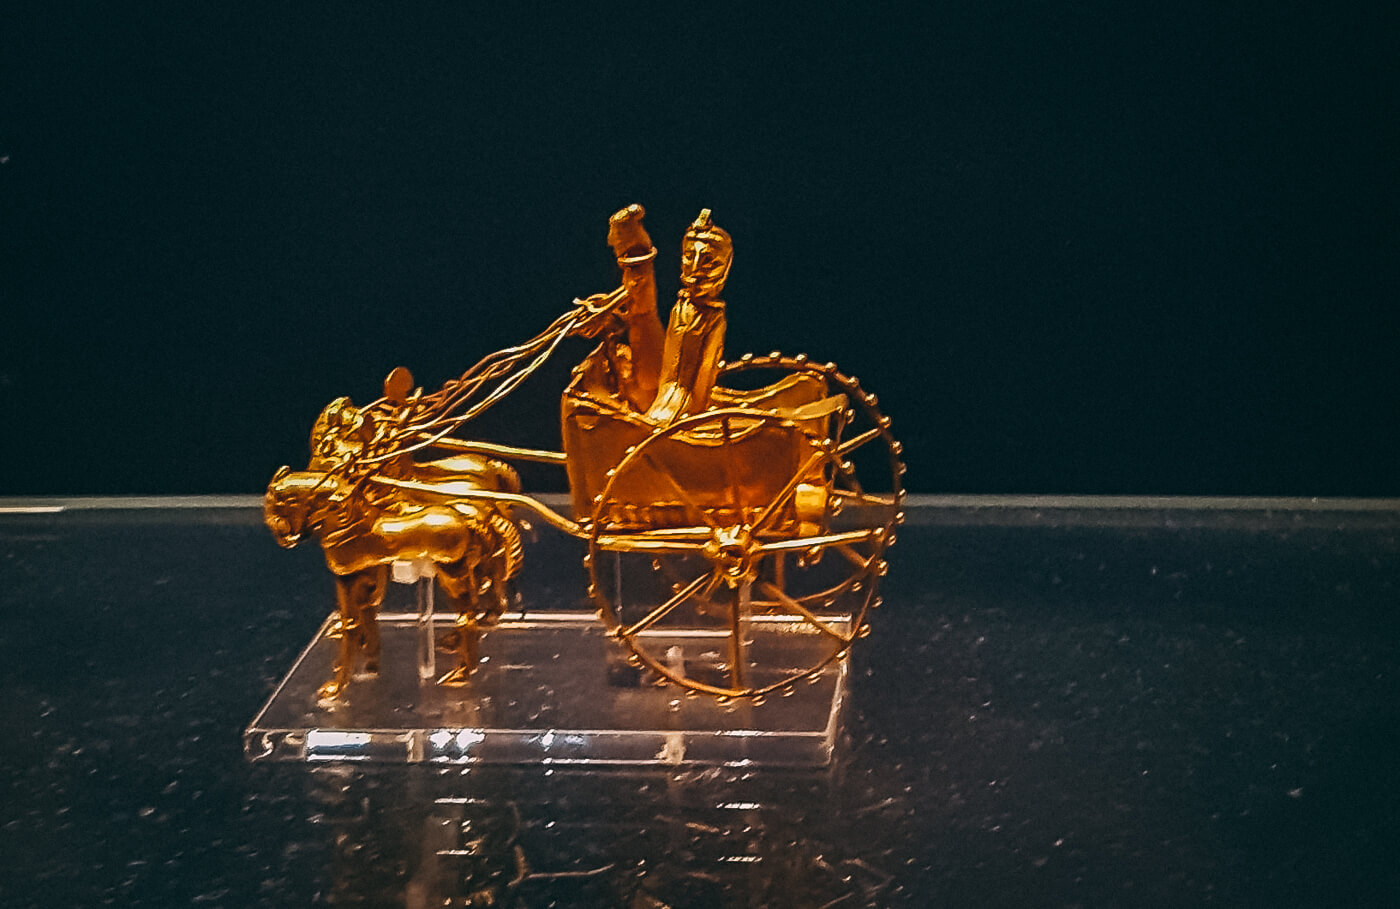 gold chariot of Oxus treasure found in Central Asia is displayed in British museum